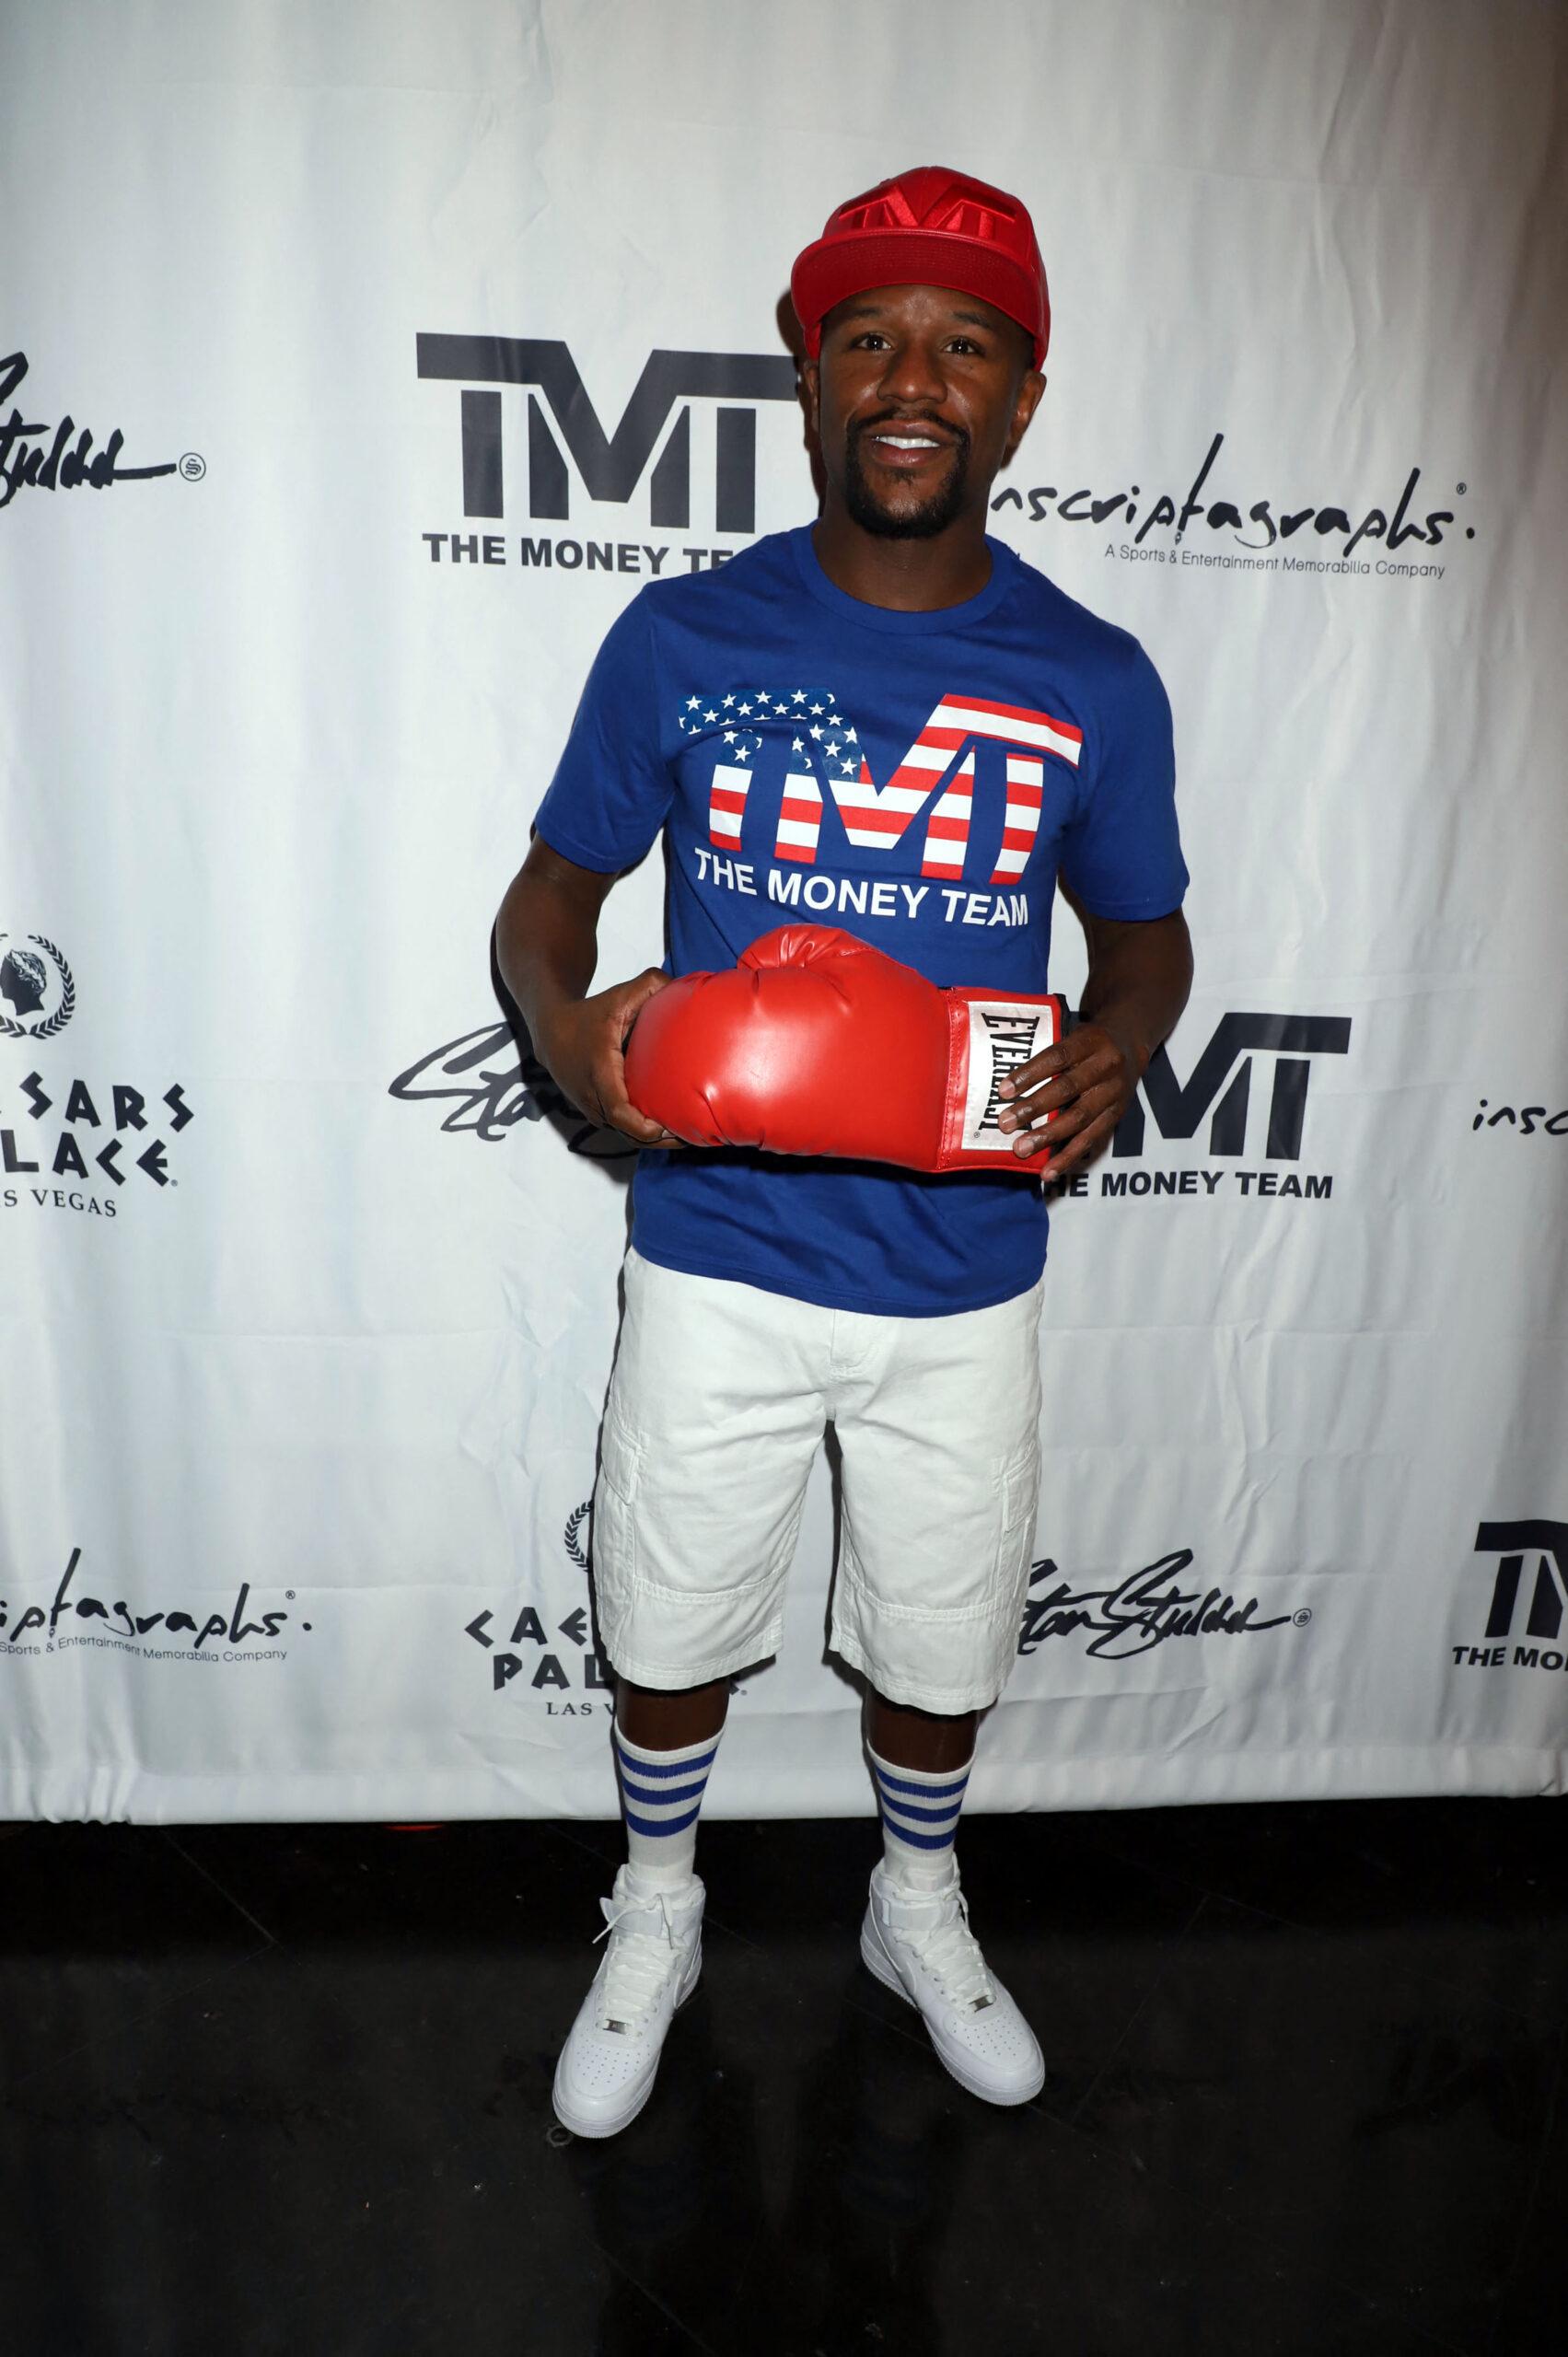 Floyd Mayweather Sued Over Car Accident In Las Vegas